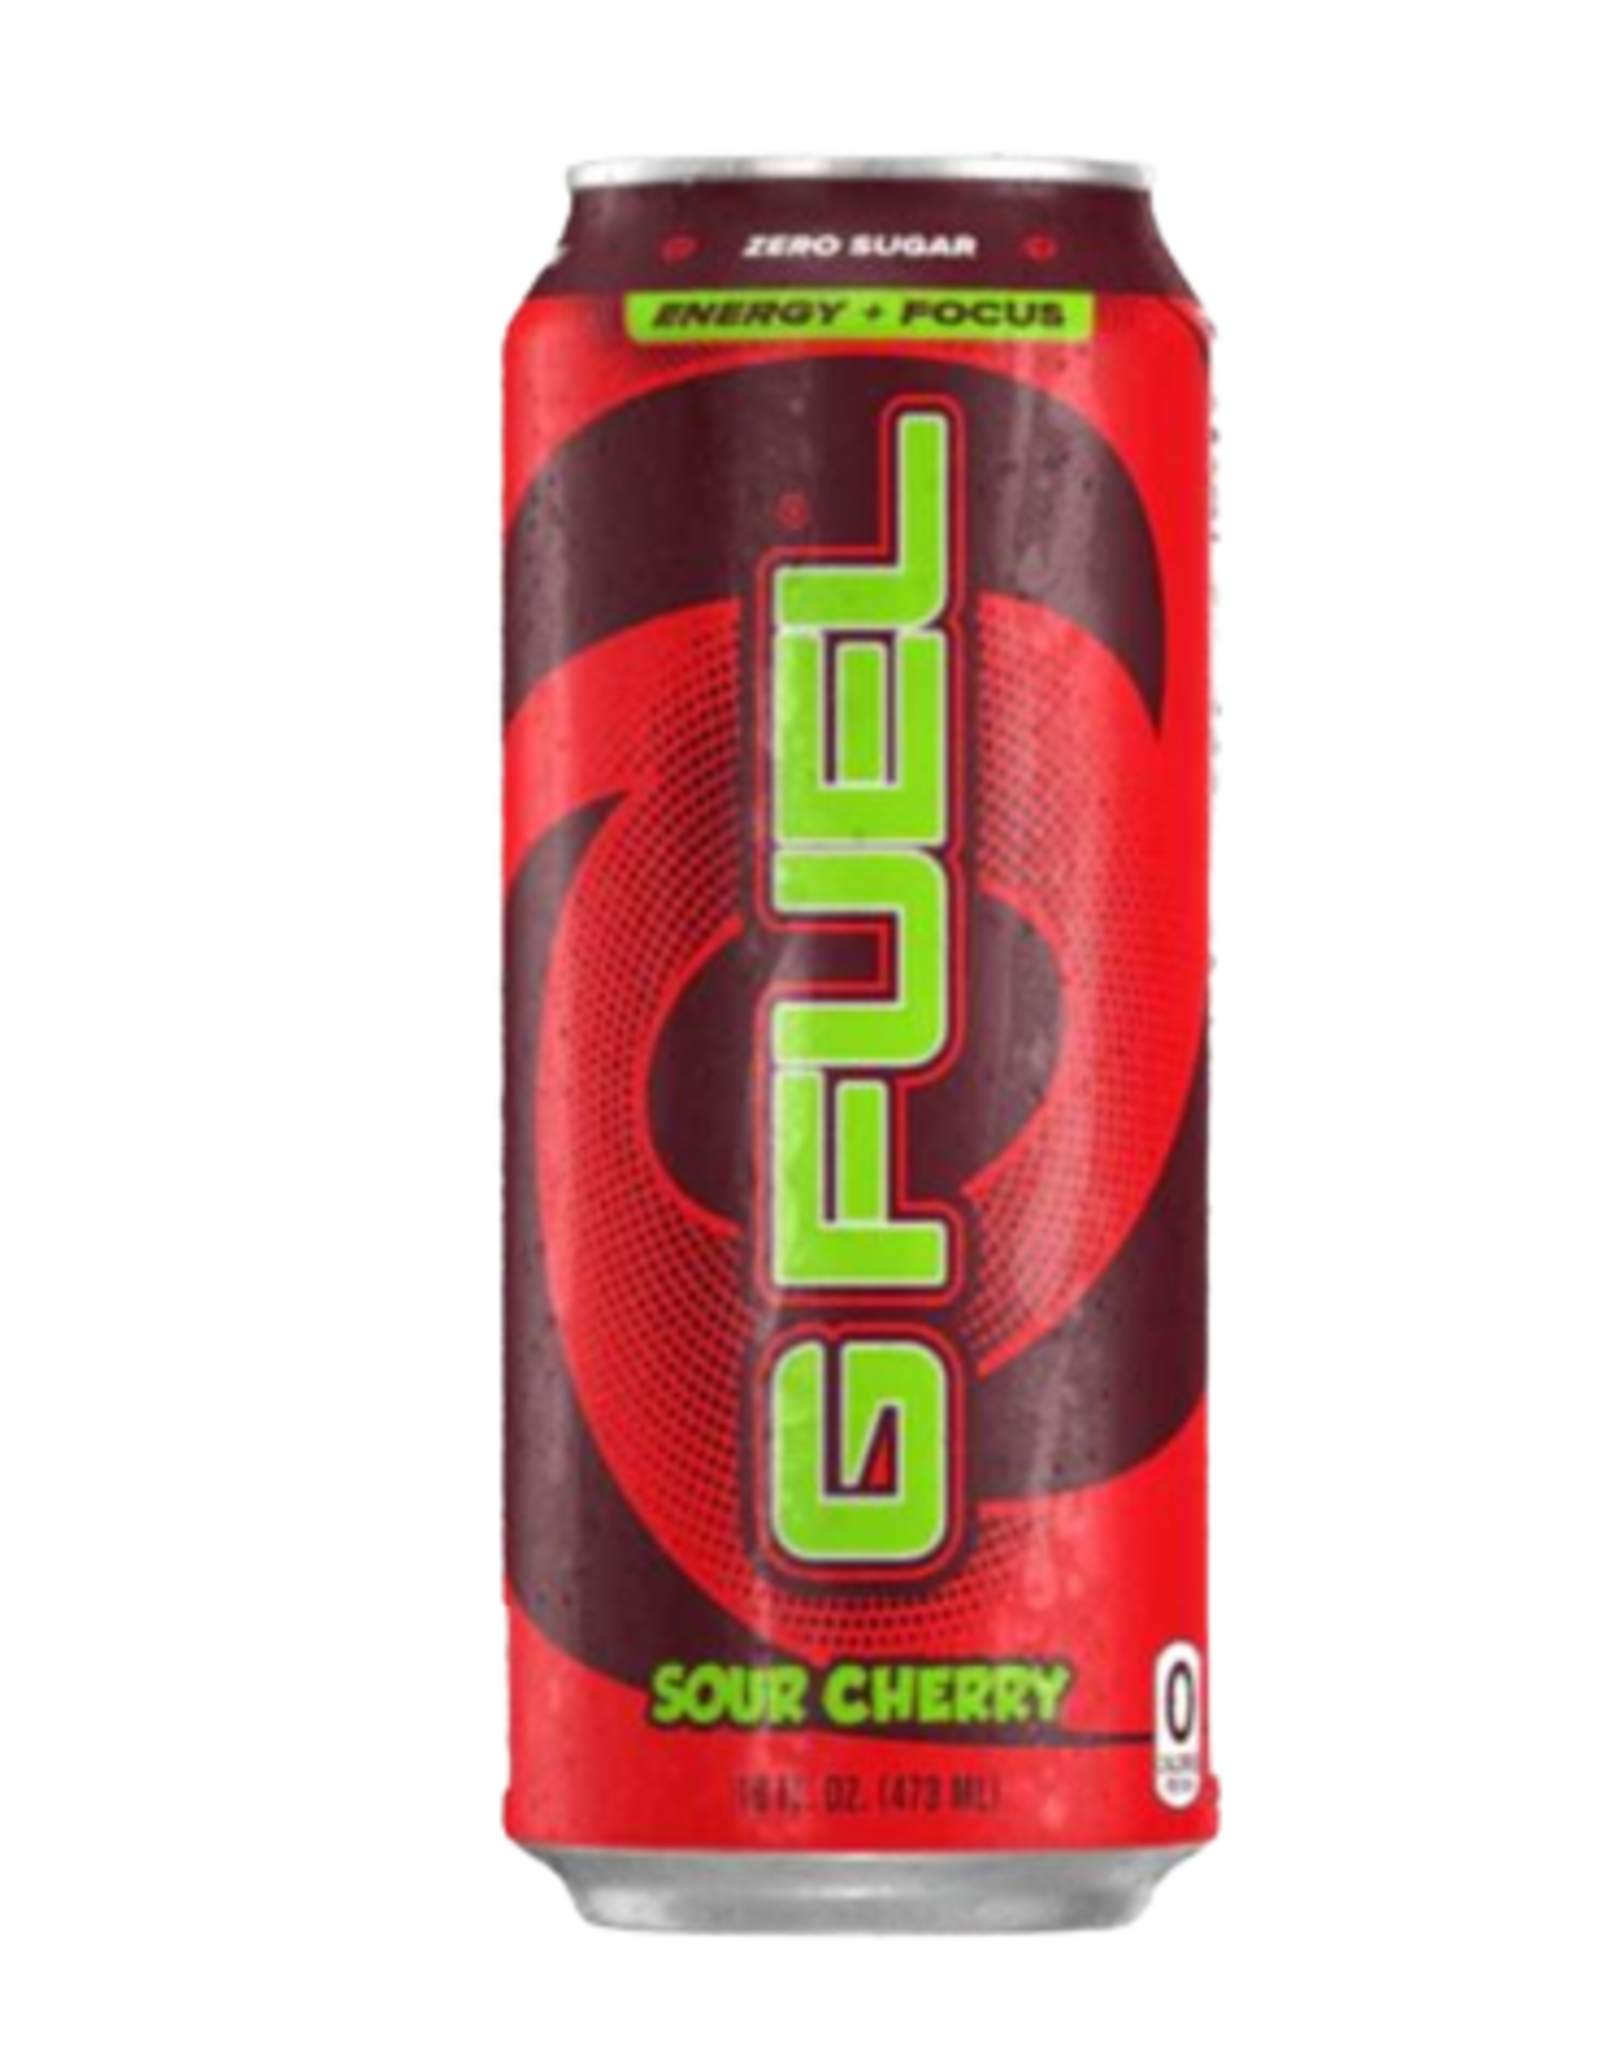 G Fuel Sour Cherry Energy Drink